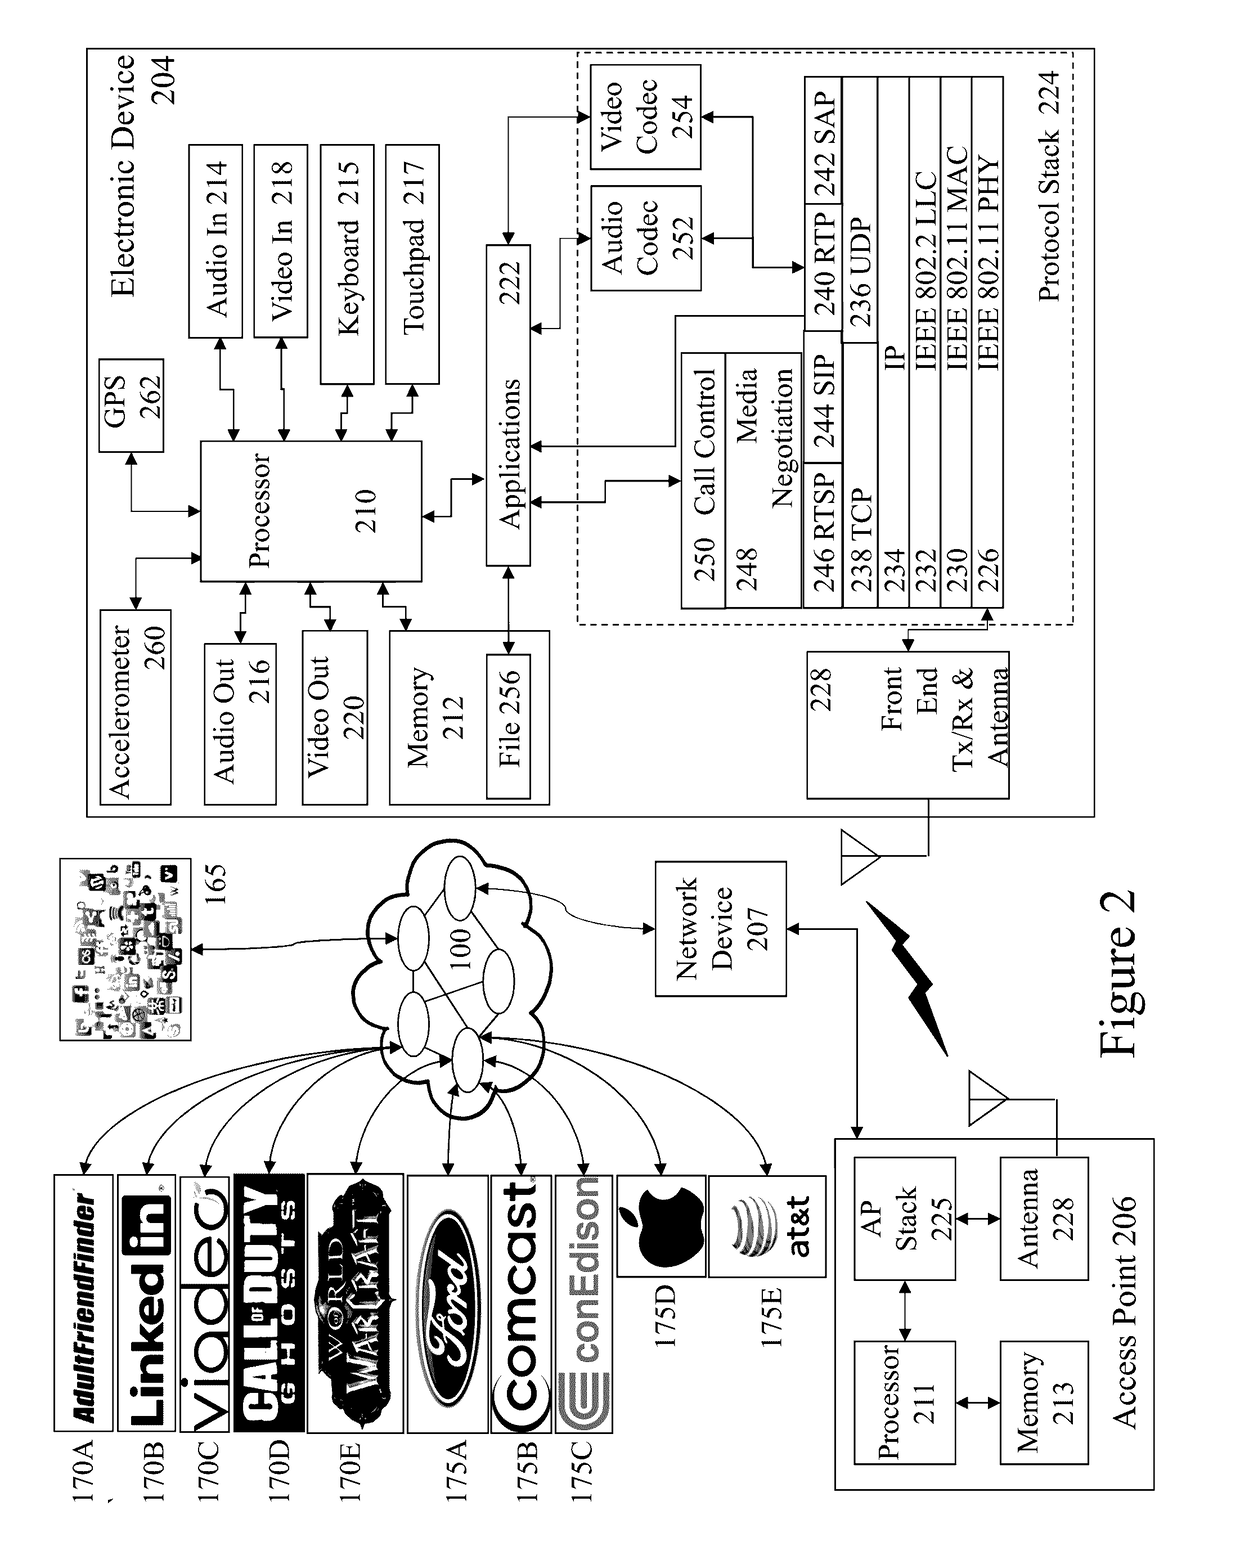 Methods and systems relating to personalized evolving avatars